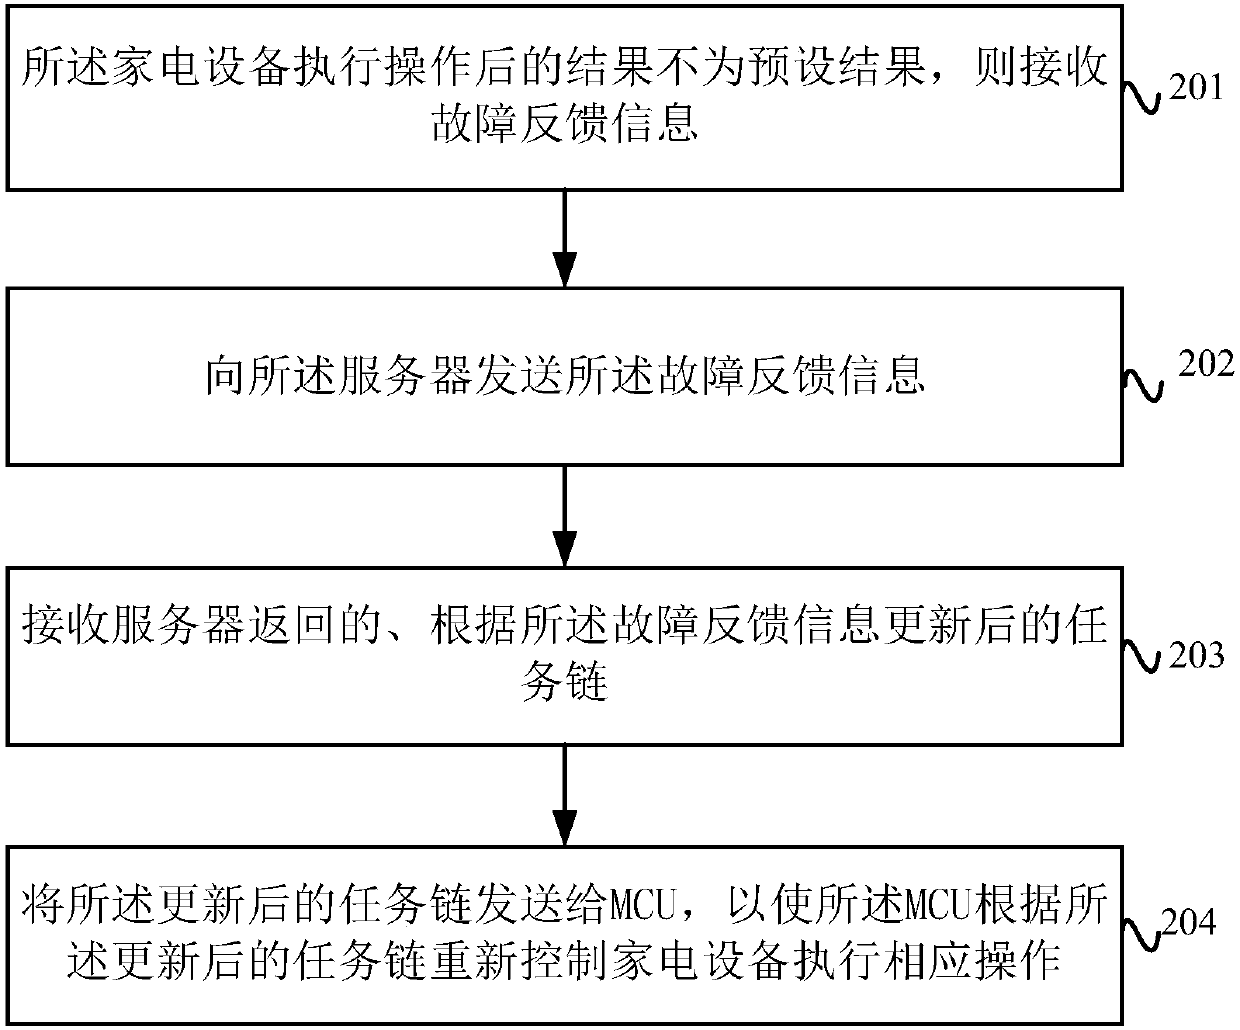 Household electrical appliance control method, device and system